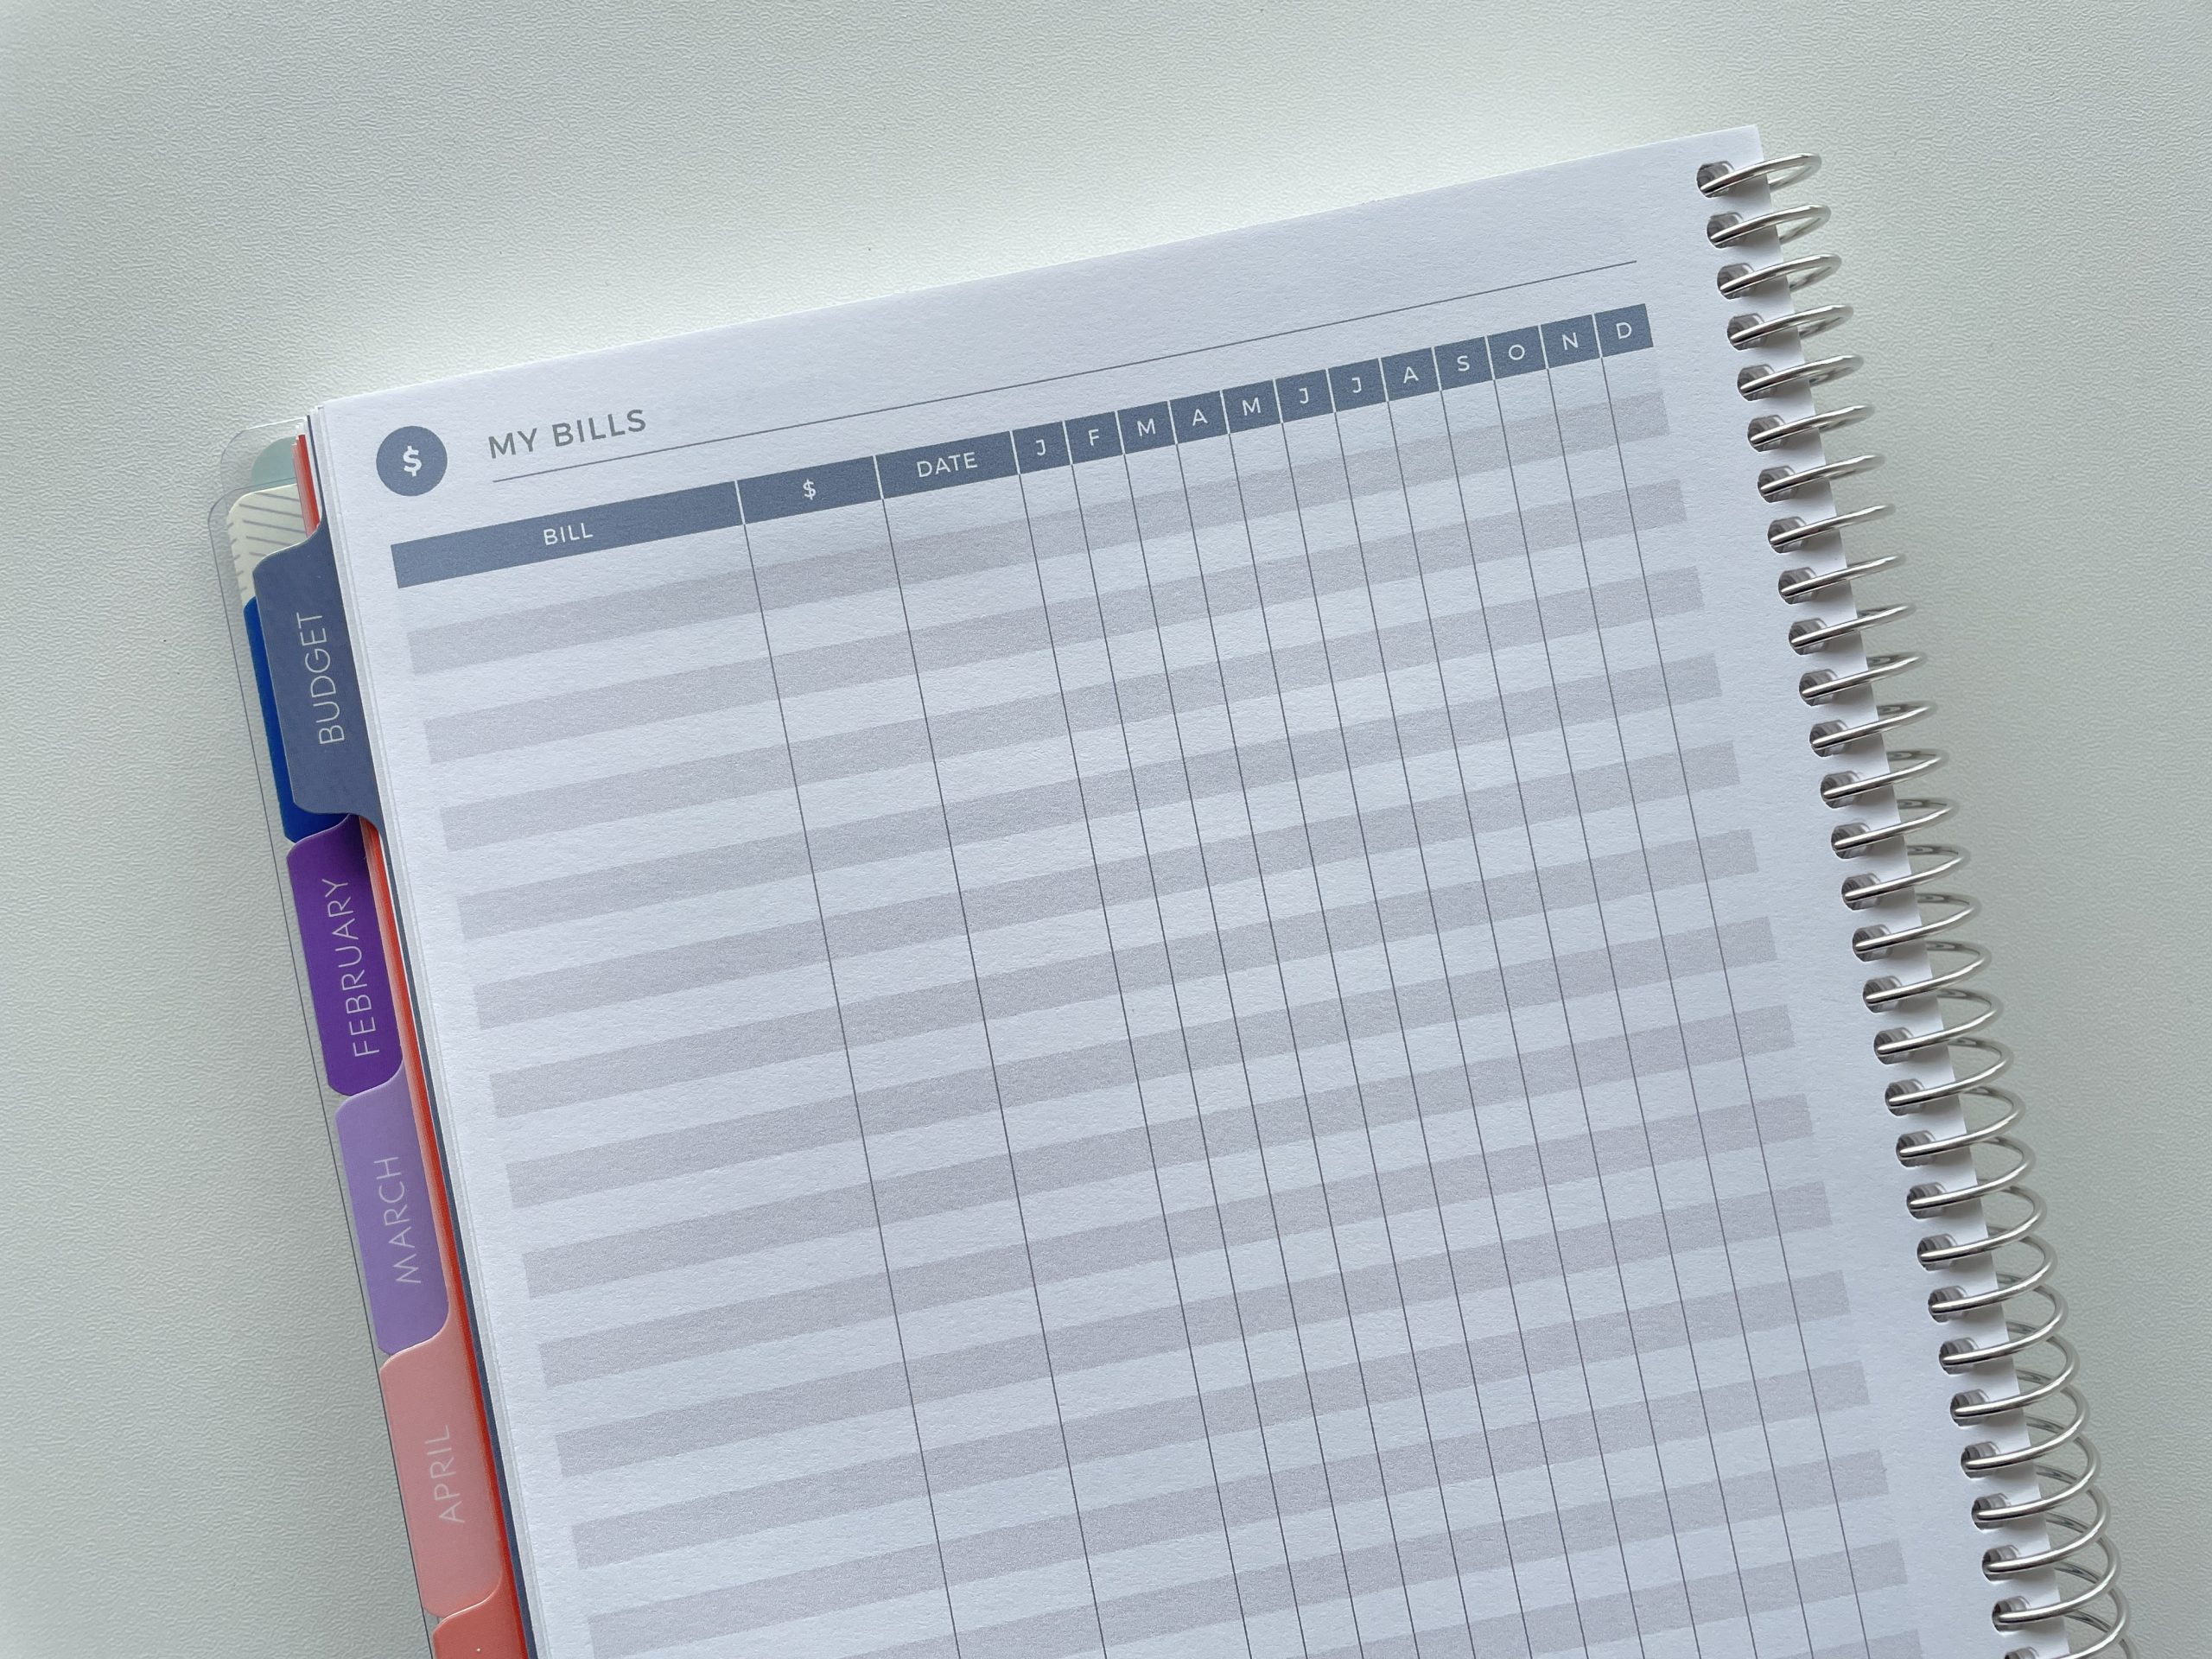 plum paper budget planner bills track spending income expenses savings goals monthly yearly weekly